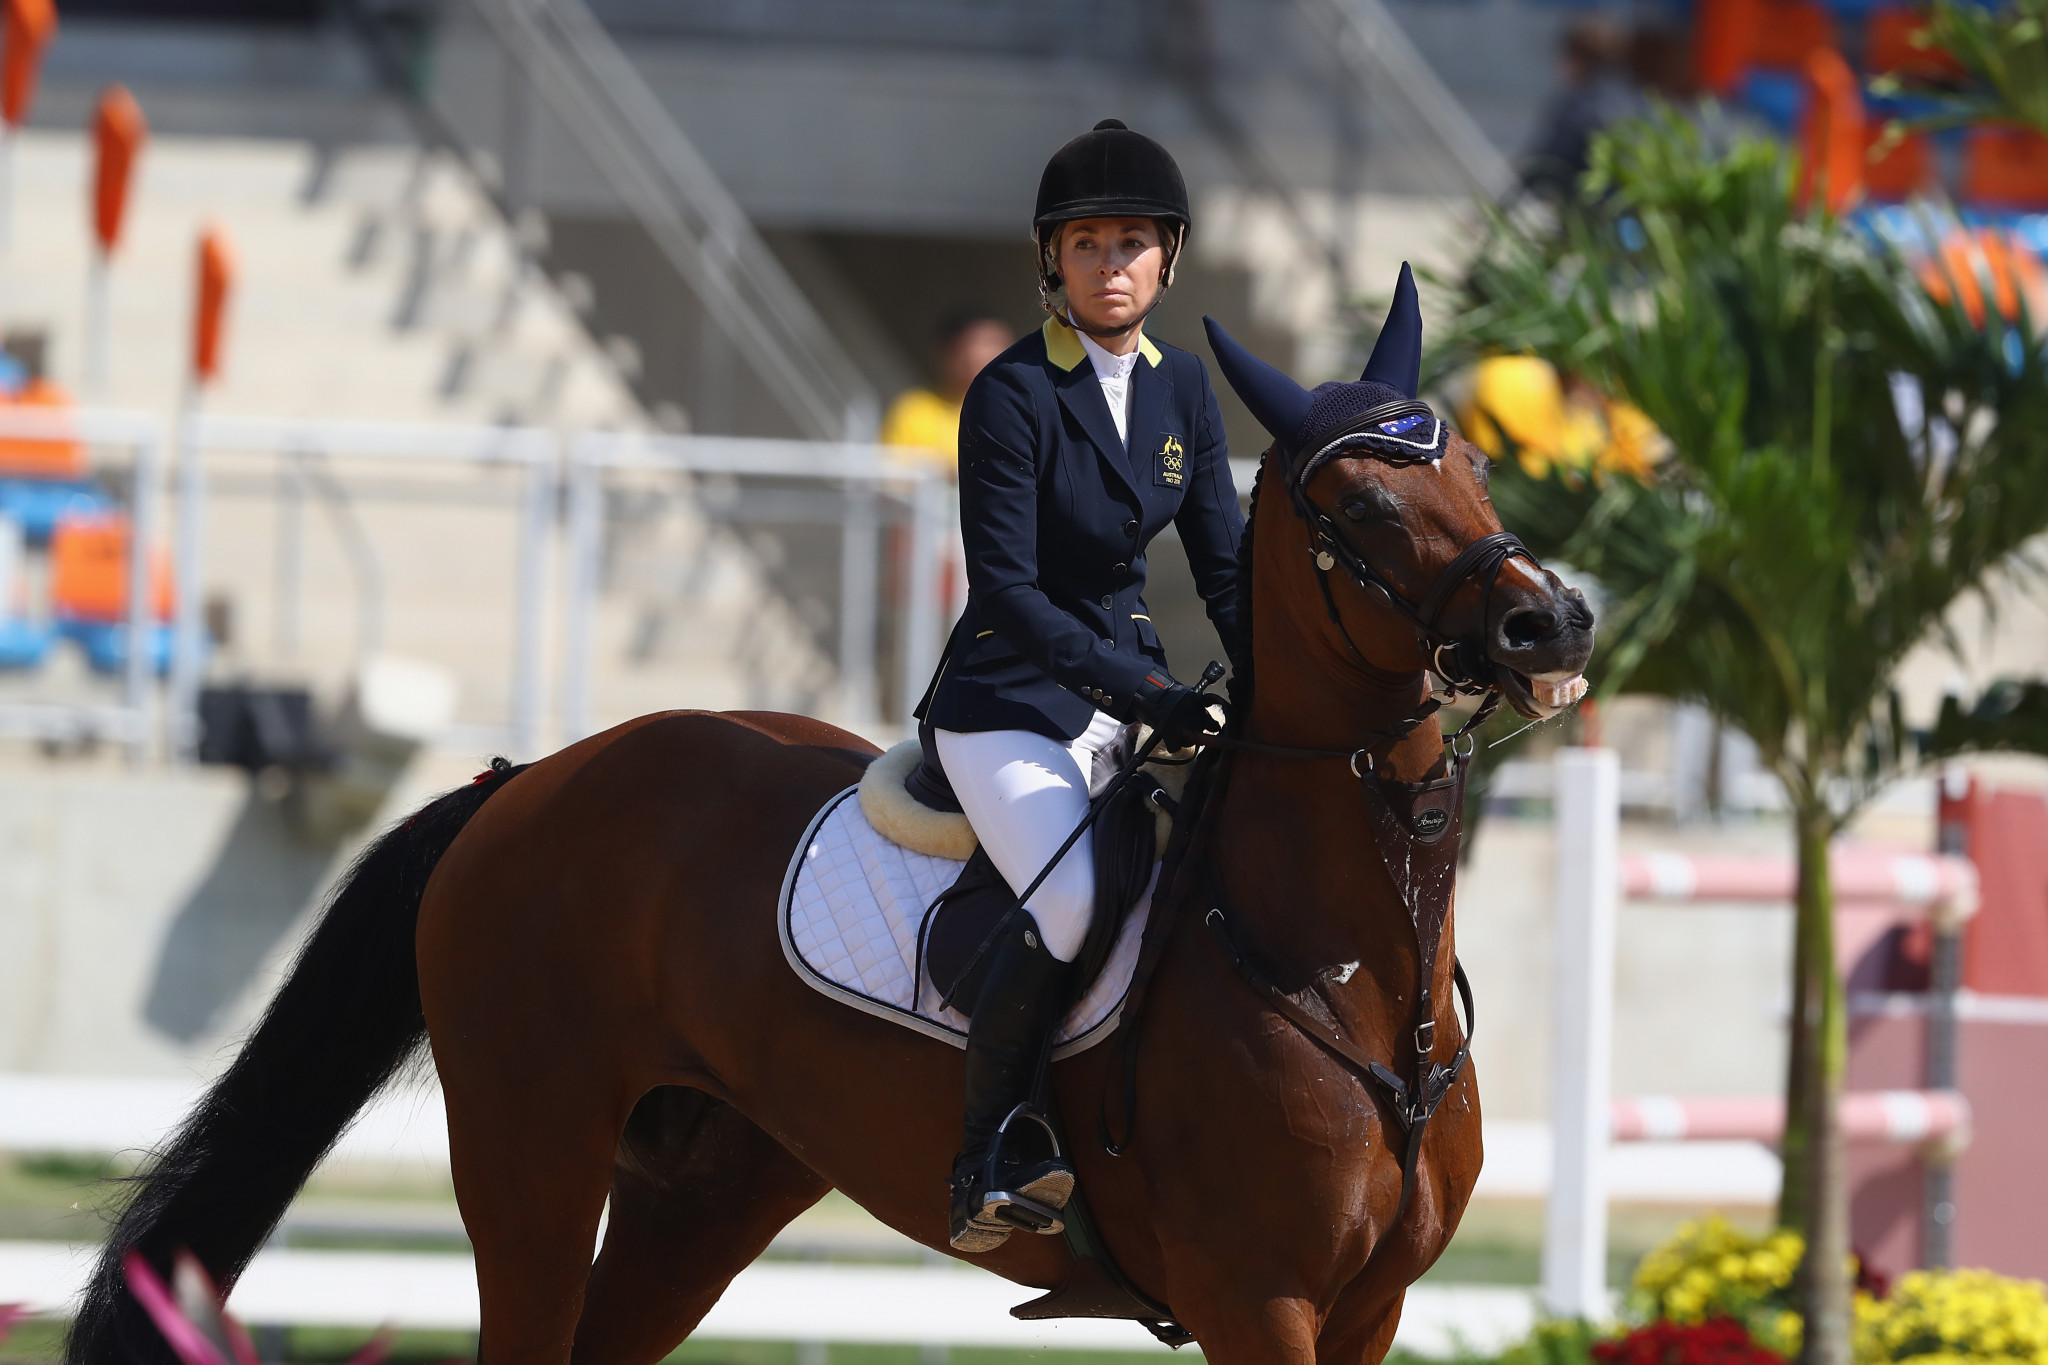 Australia's Edwina Tops-Alexander has the chance to close the gap at the top of the season standings at the Longines Global Champions Tour event in Paris ©Getty Images